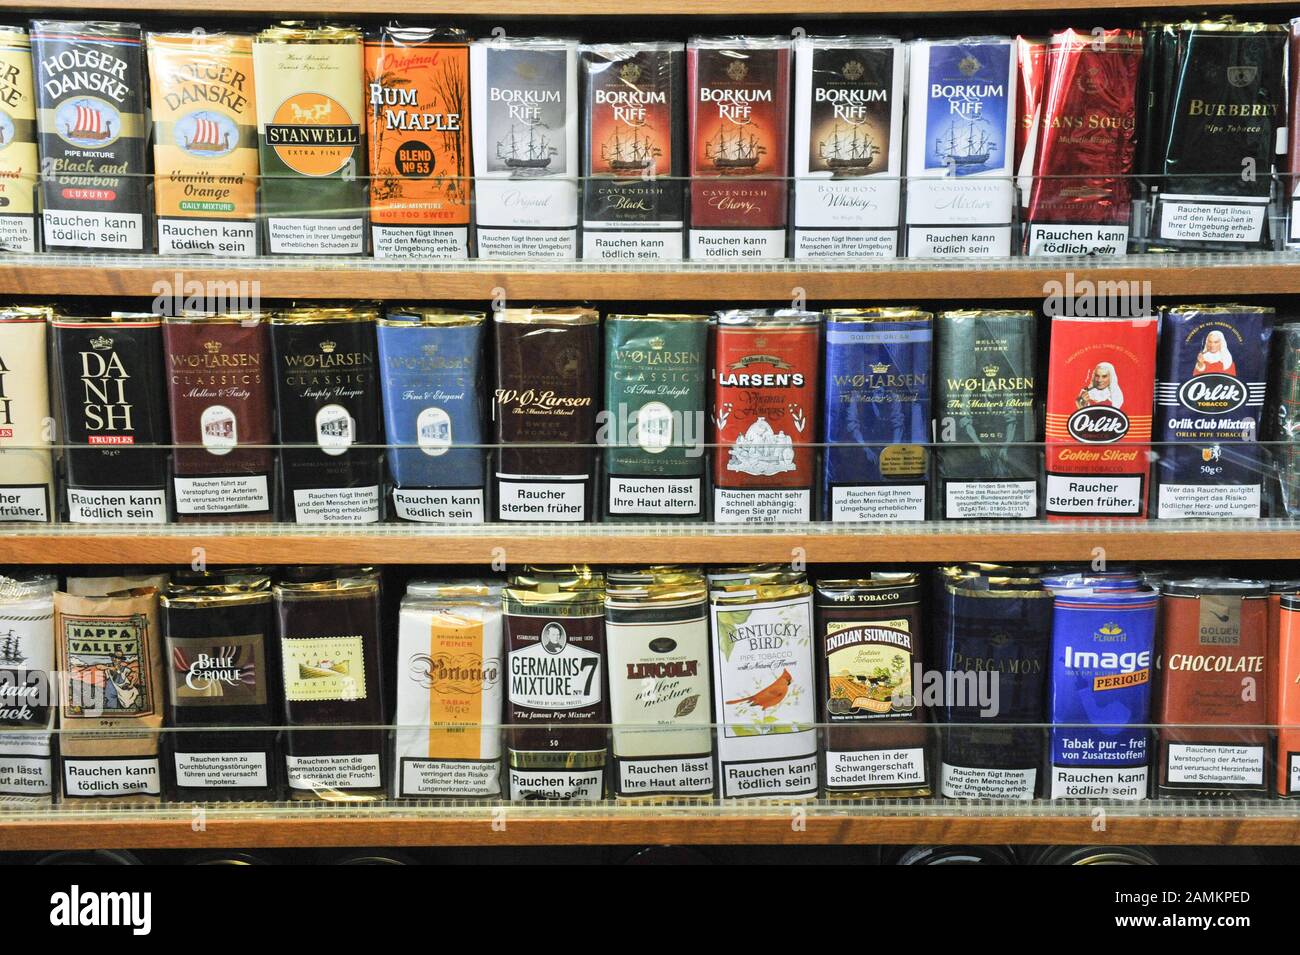 Les paquets de tabacs - Page 3 Tobacco-shelf-in-the-cigar-shop-of-the-max-zechbauer-tabakwaren-gmbh-und-co-kg-in-the-zechbauer-haus-in-residenzstrasse-10-automated-translation-2AMKPED